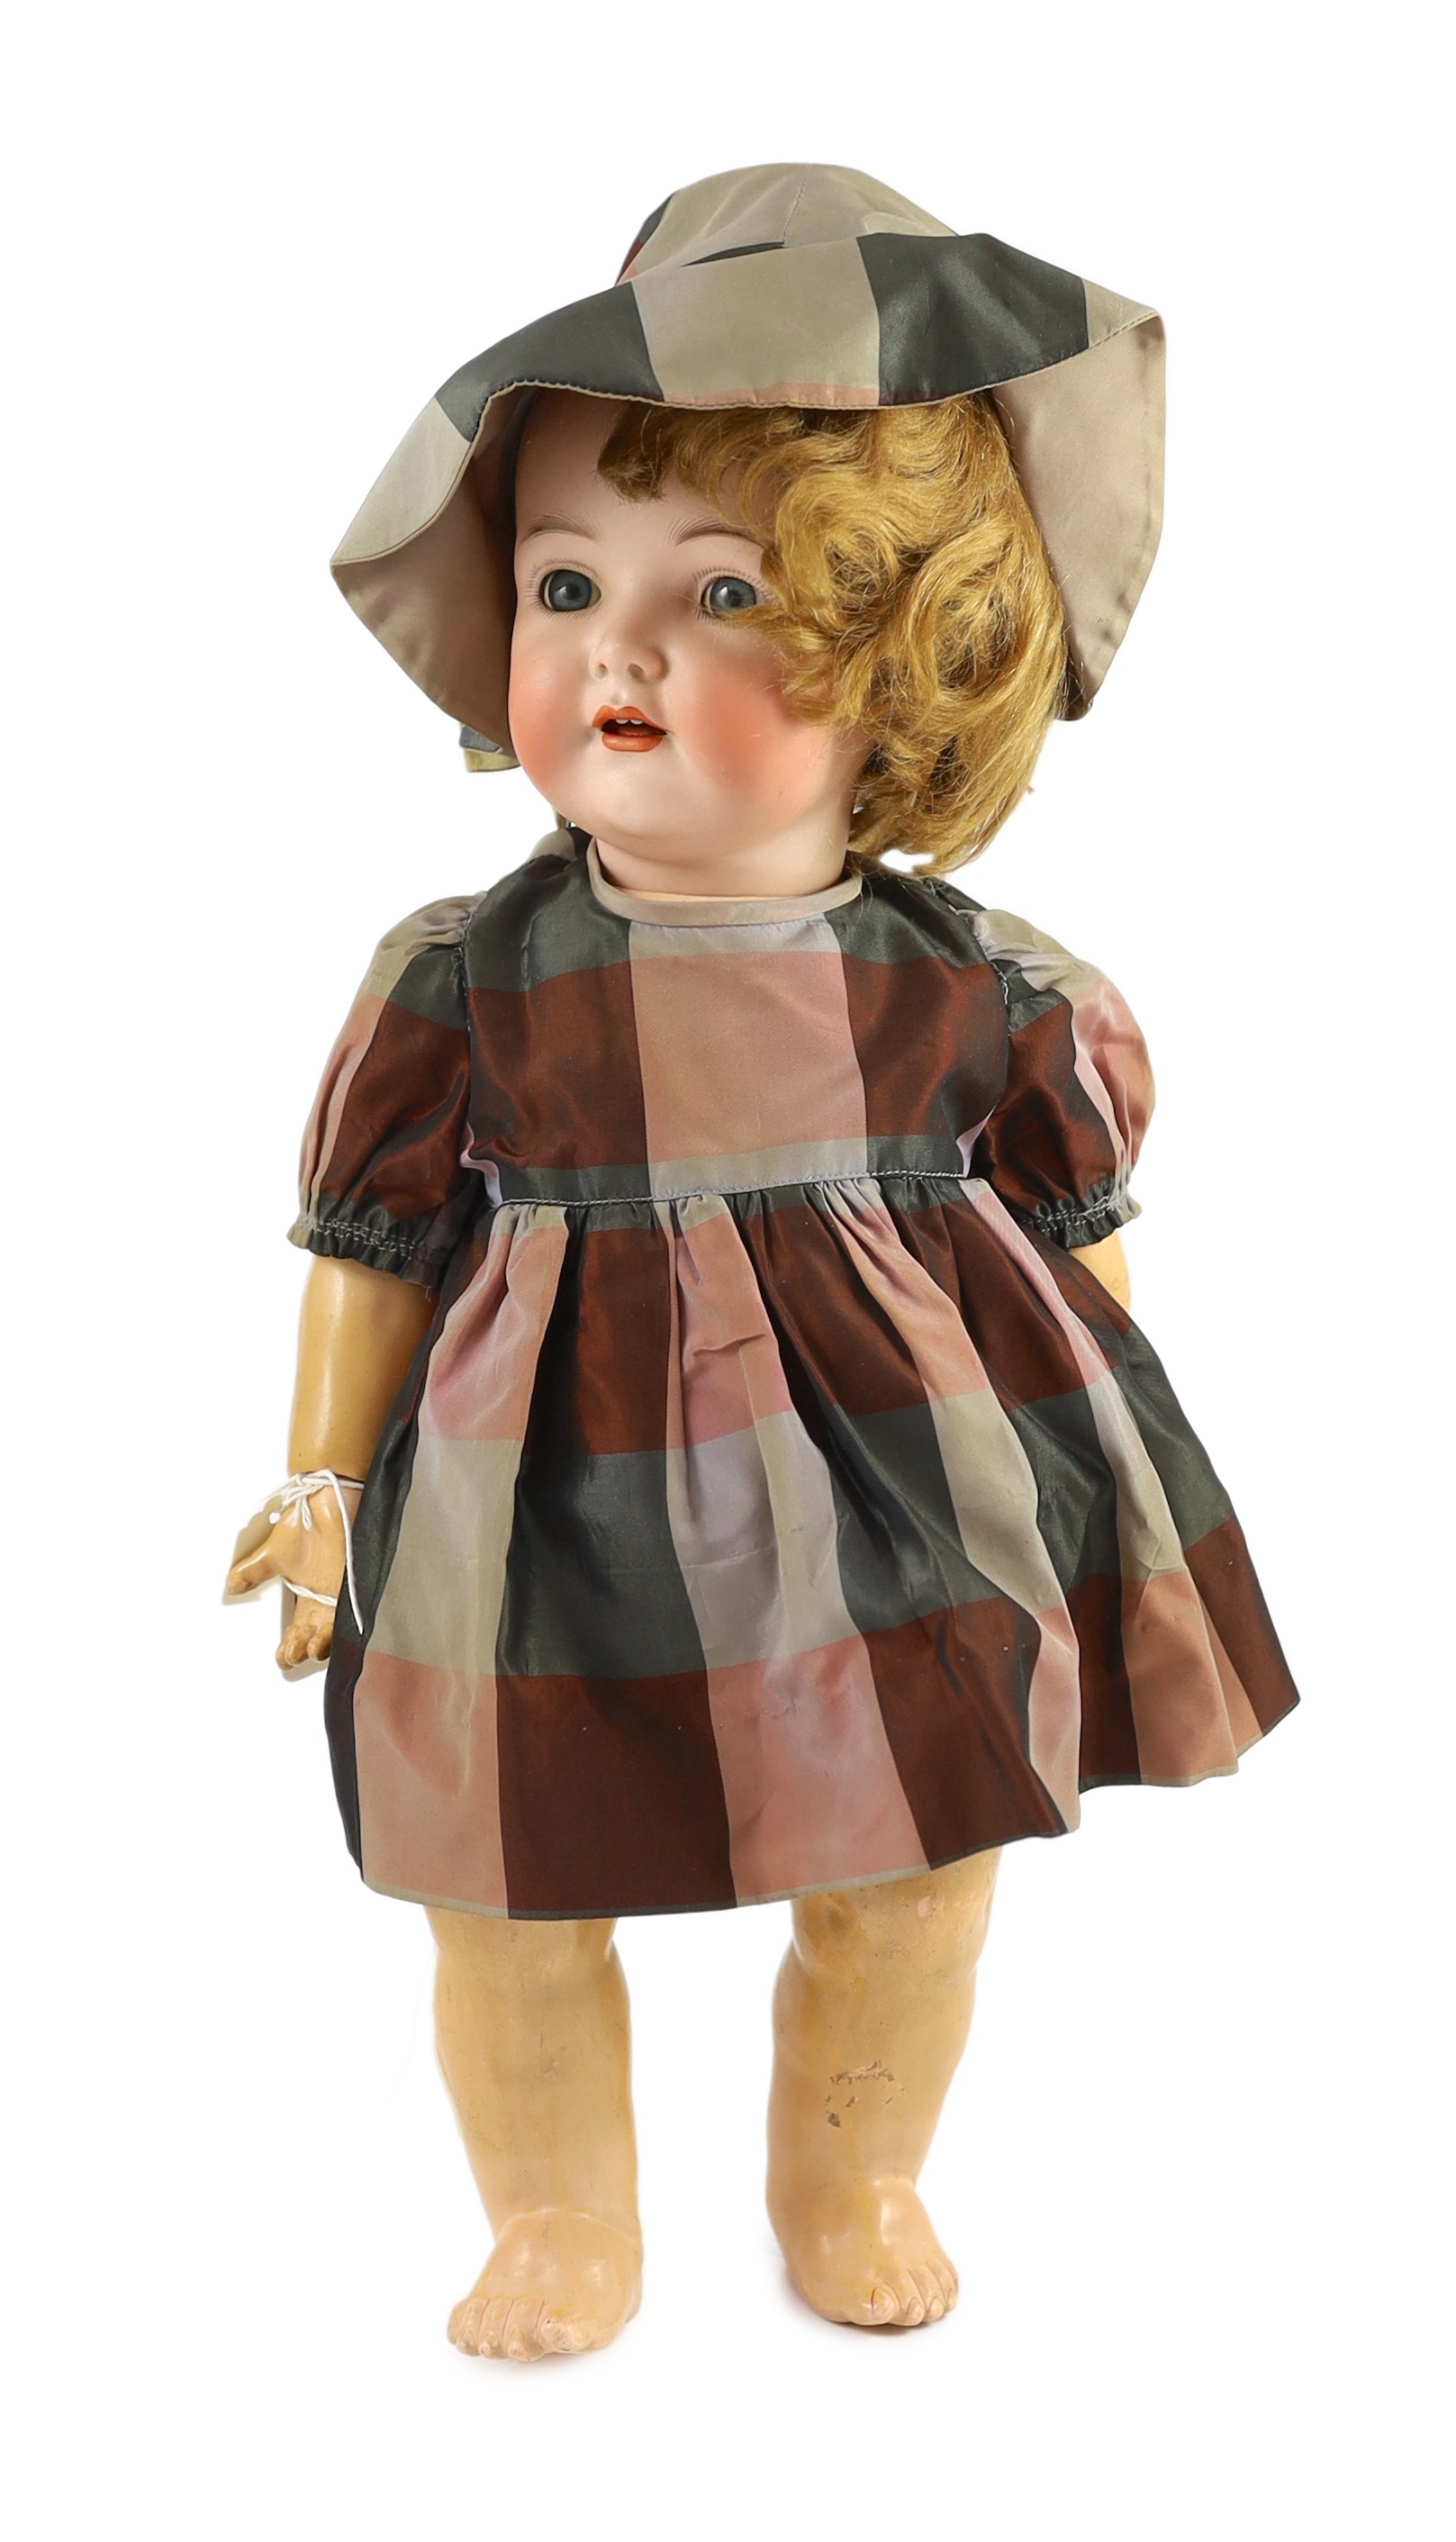 A Simon & Halbig walking-talking bisque doll, 9in.                                                                                                                                                                          